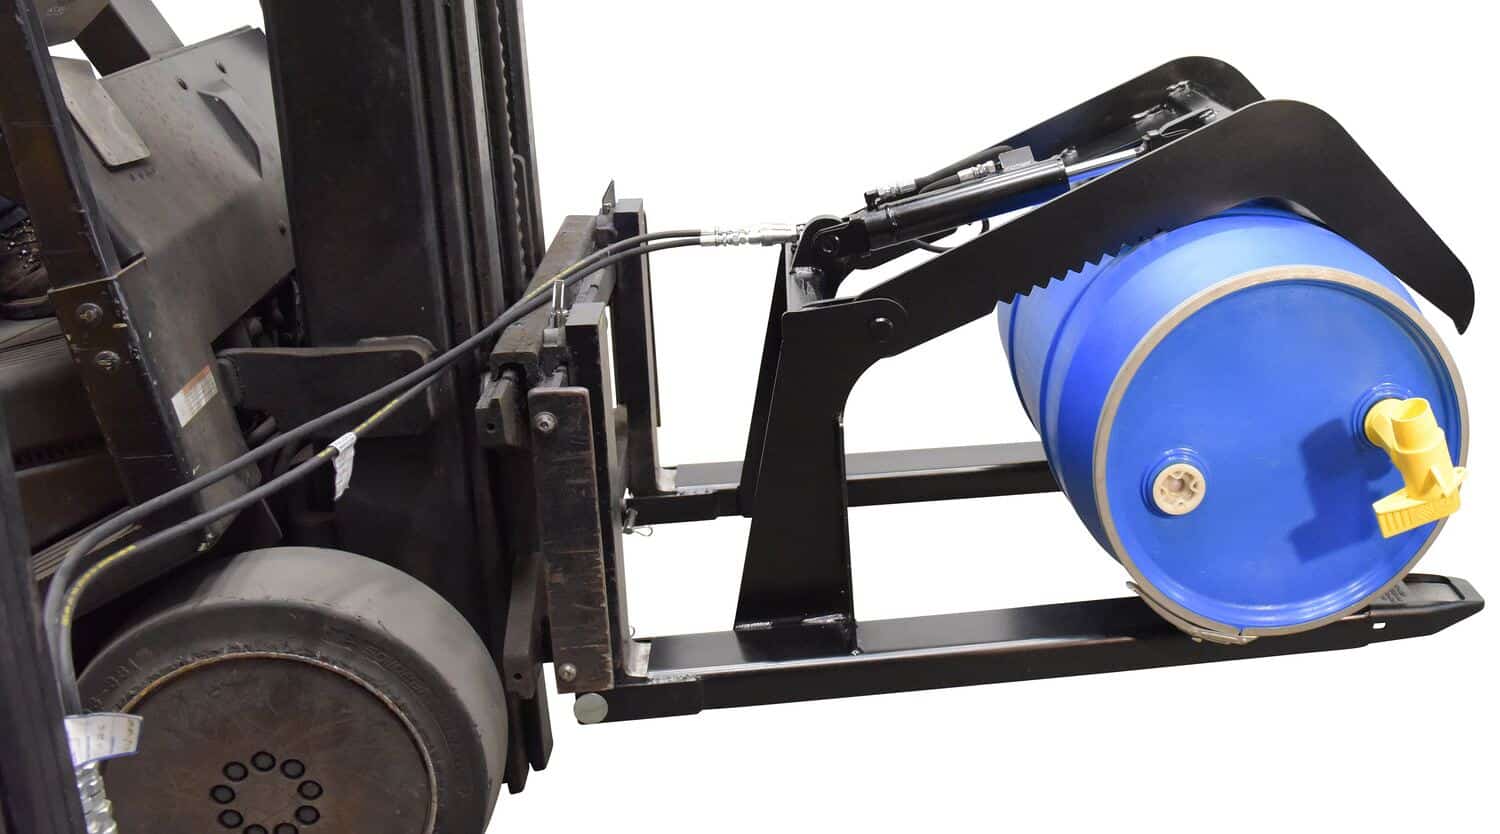 Forklift Clamp Attachments